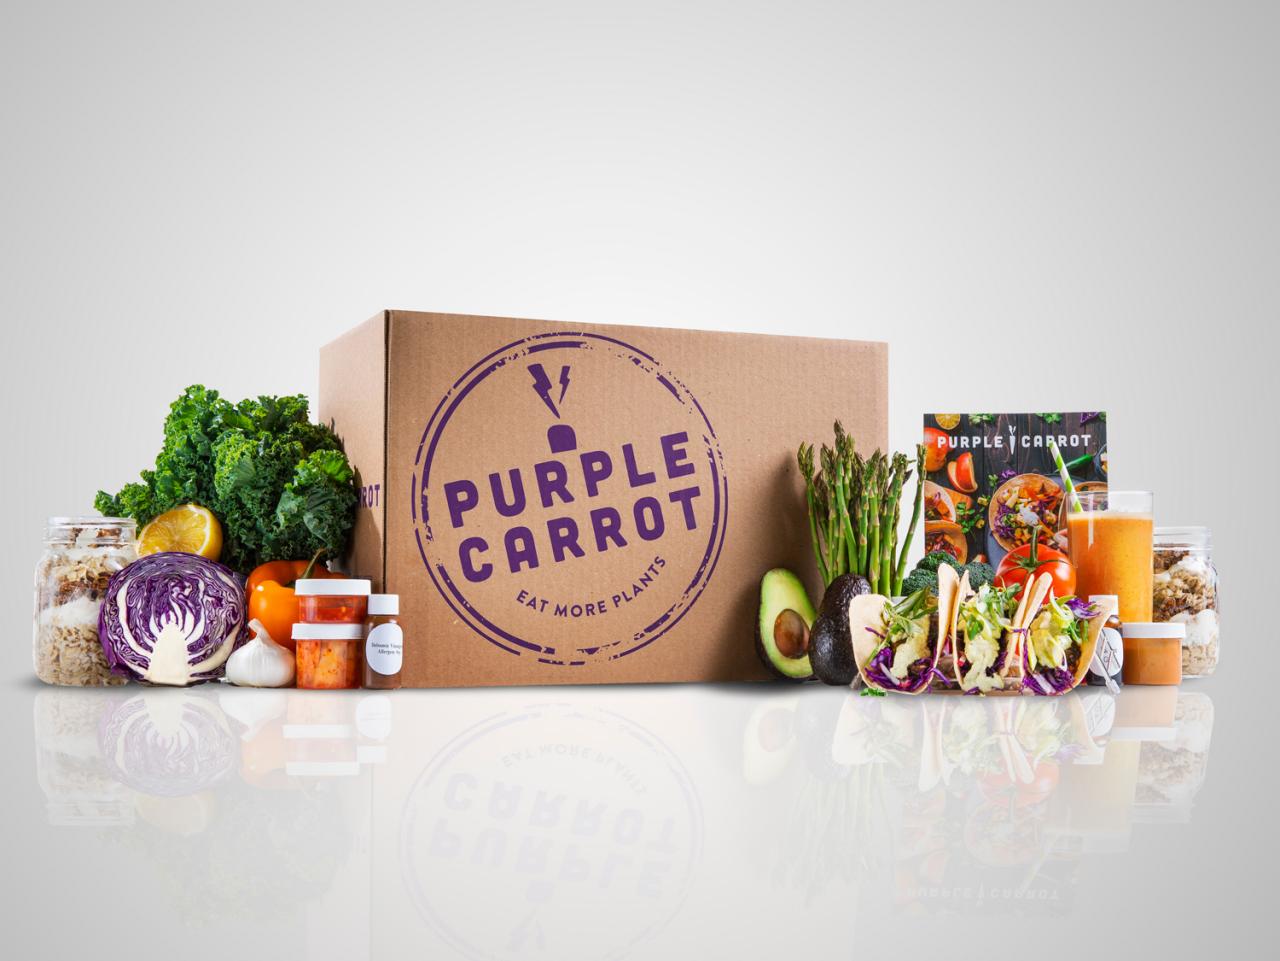 https://food.fnr.sndimg.com/content/dam/images/food/products/2019/9/17/rx_purple-carrot.jpg.rend.hgtvcom.1280.960.suffix/1568737213415.jpeg